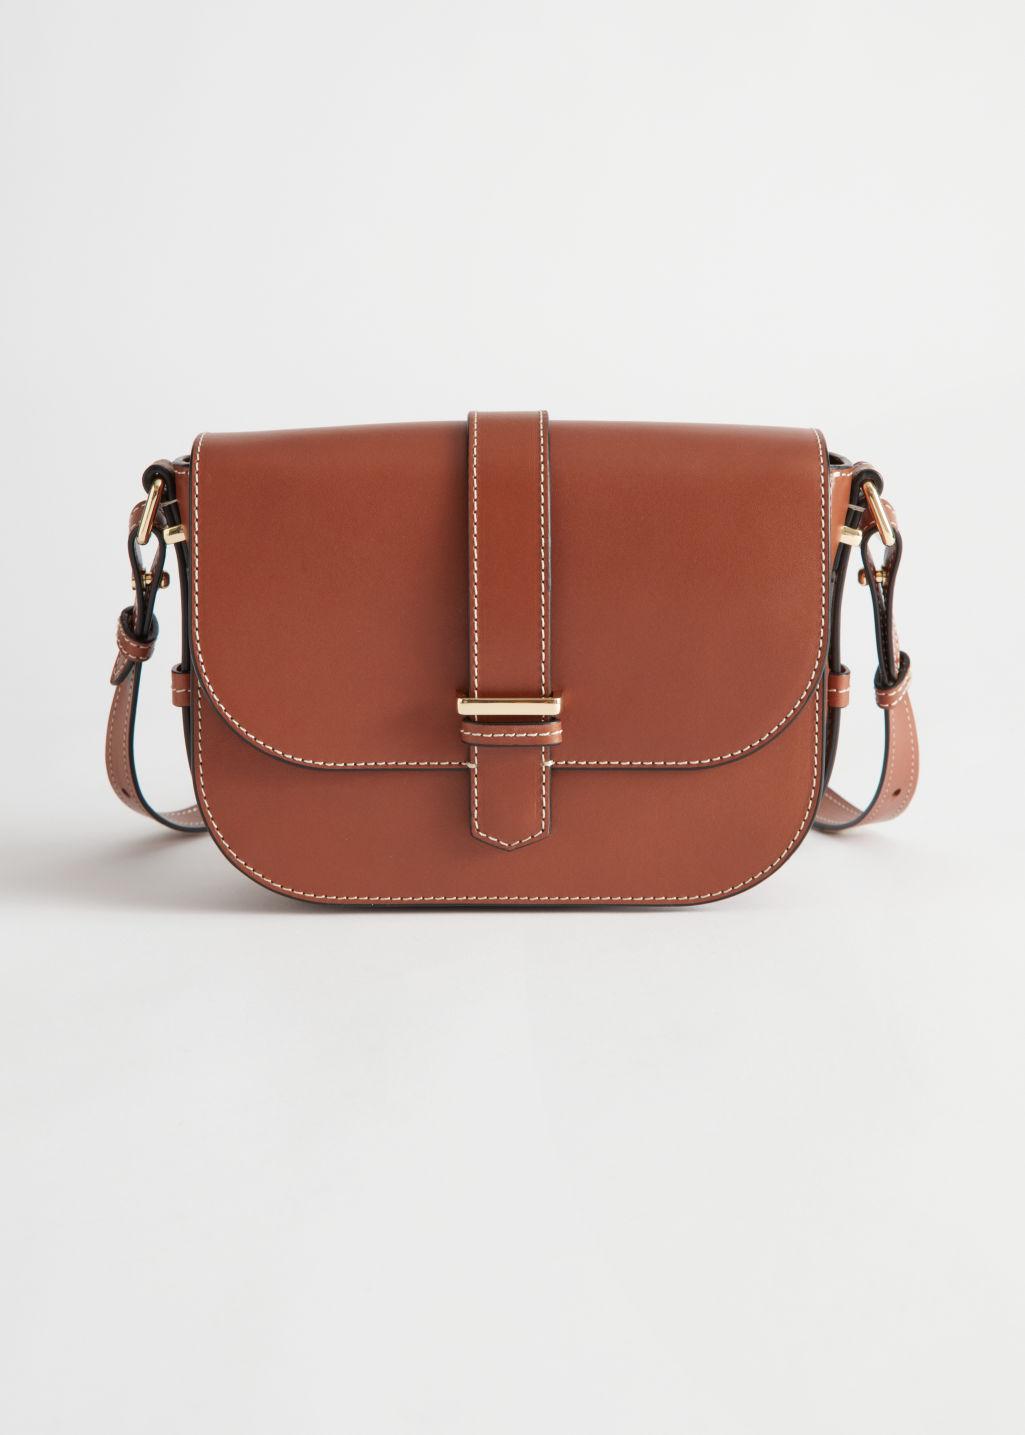 & Other Stories Crossbody Leather Bag in Natural | Lyst